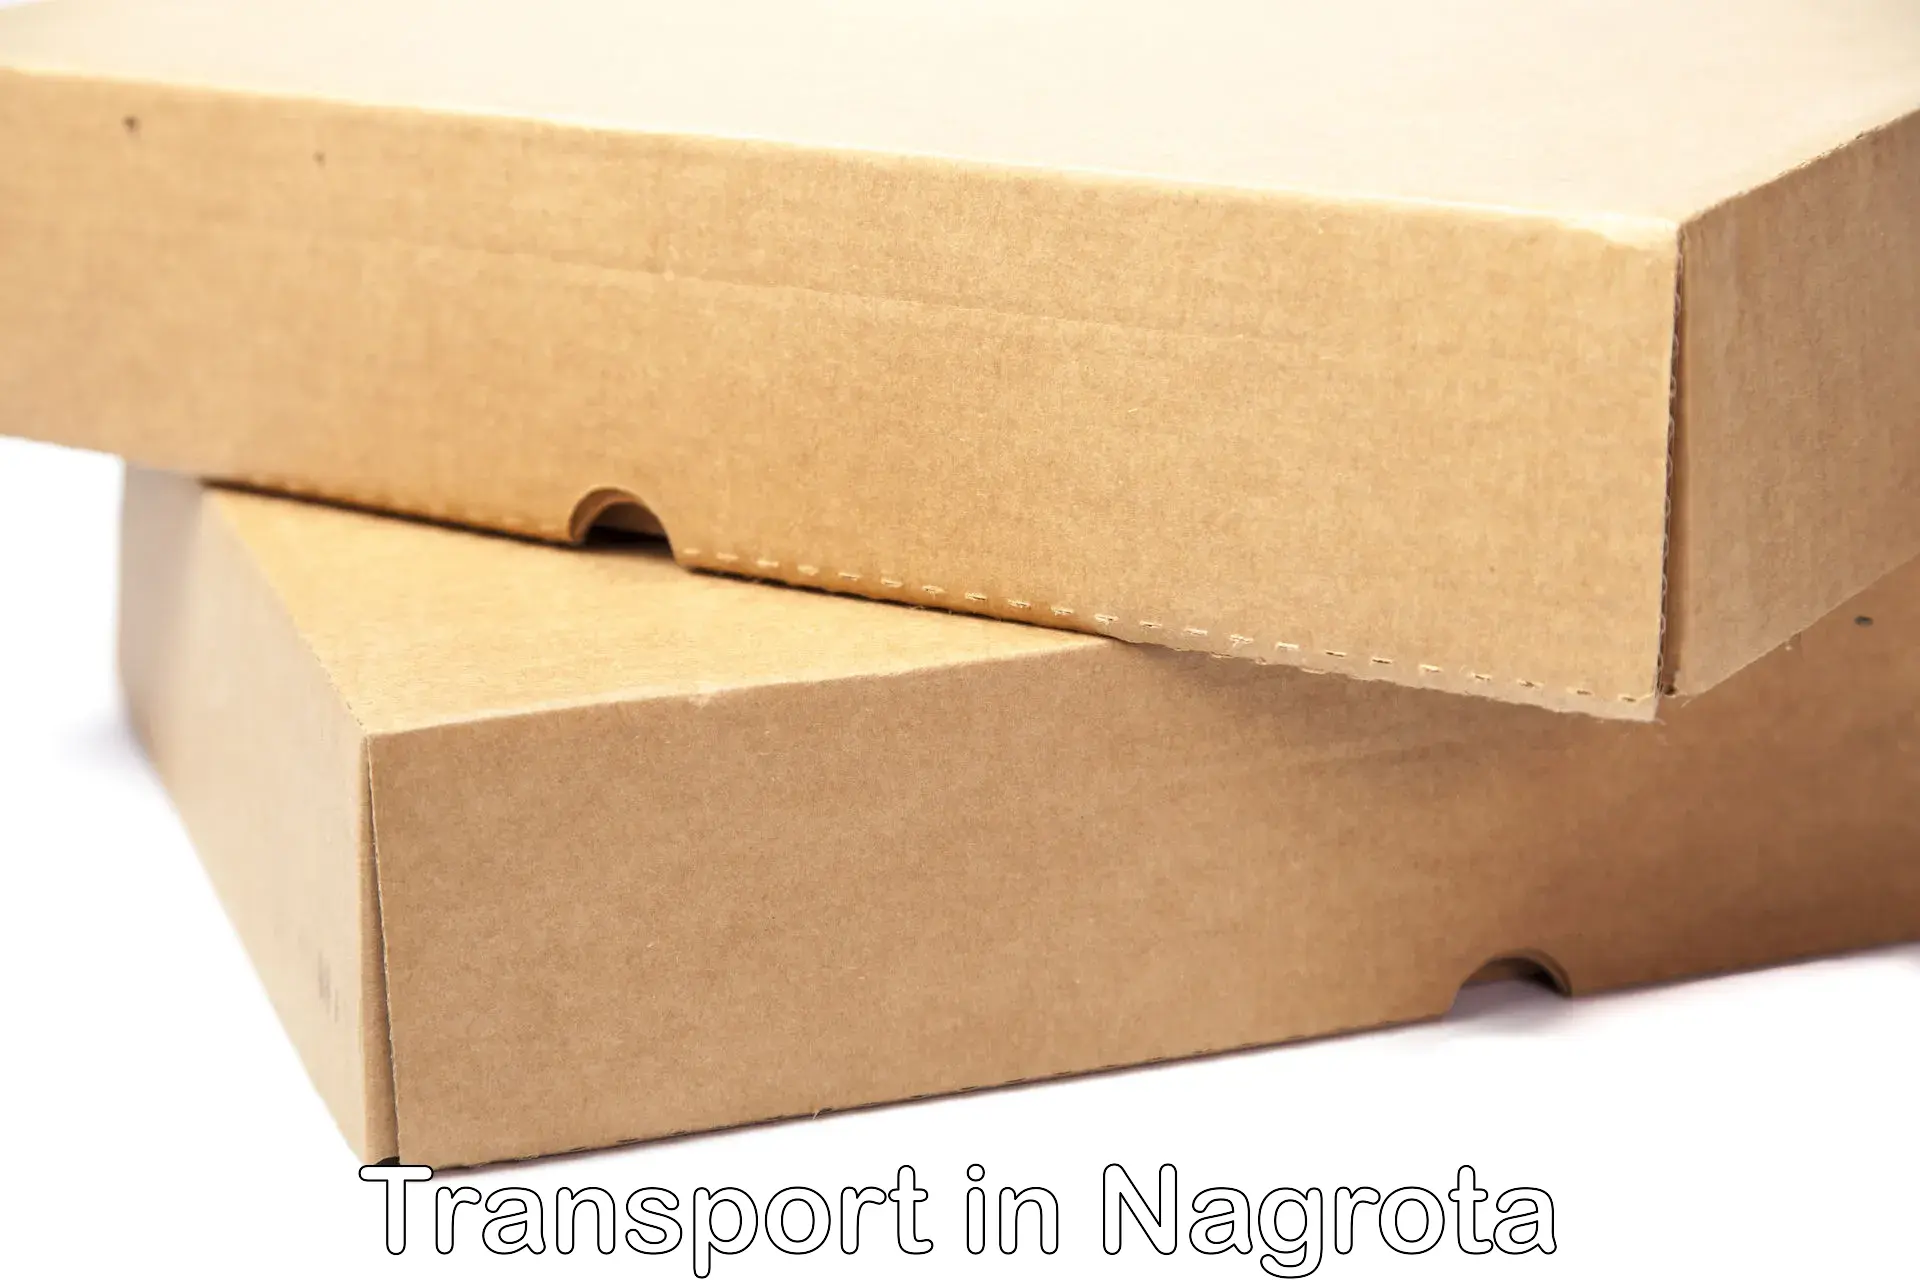 Container transport service in Nagrota